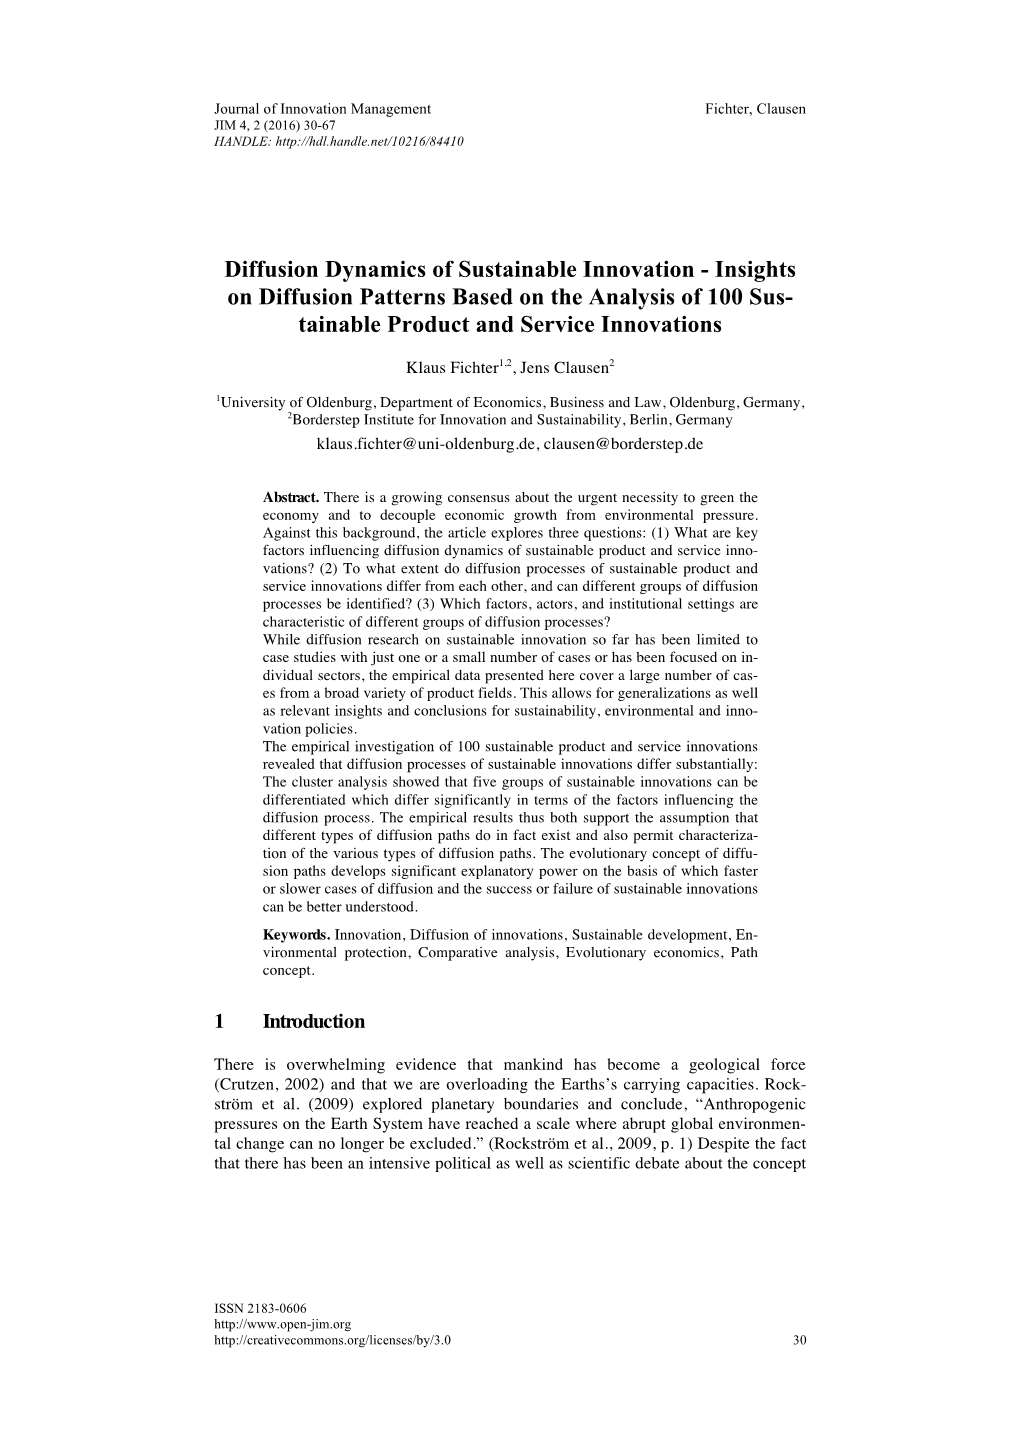 Diffusion Dynamics of Sustainable Innovation - Insights on Diffusion Patterns Based on the Analysis of 100 Sus- Tainable Product and Service Innovations